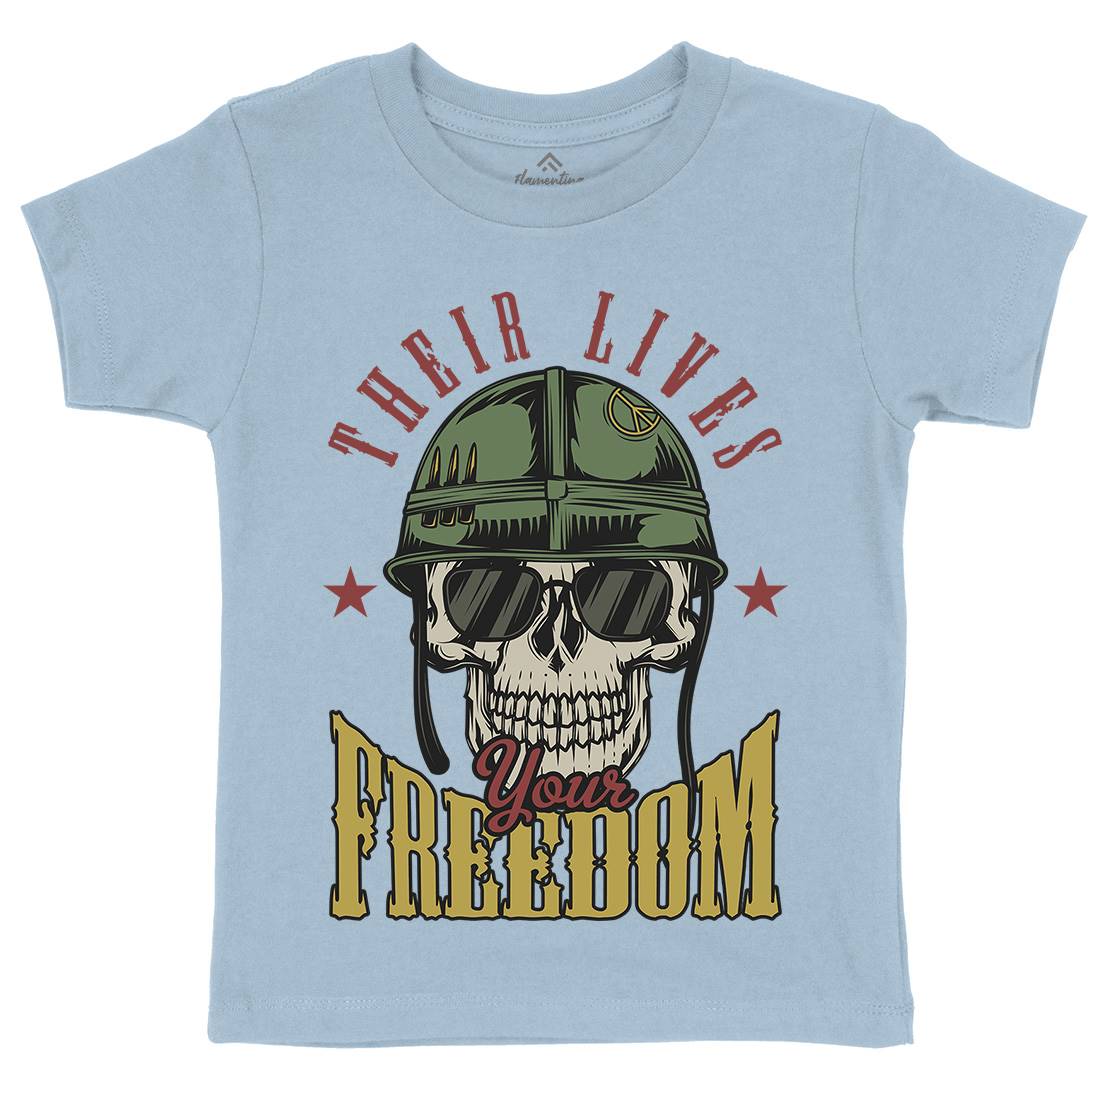 Your Freedom Kids Crew Neck T-Shirt Army C899